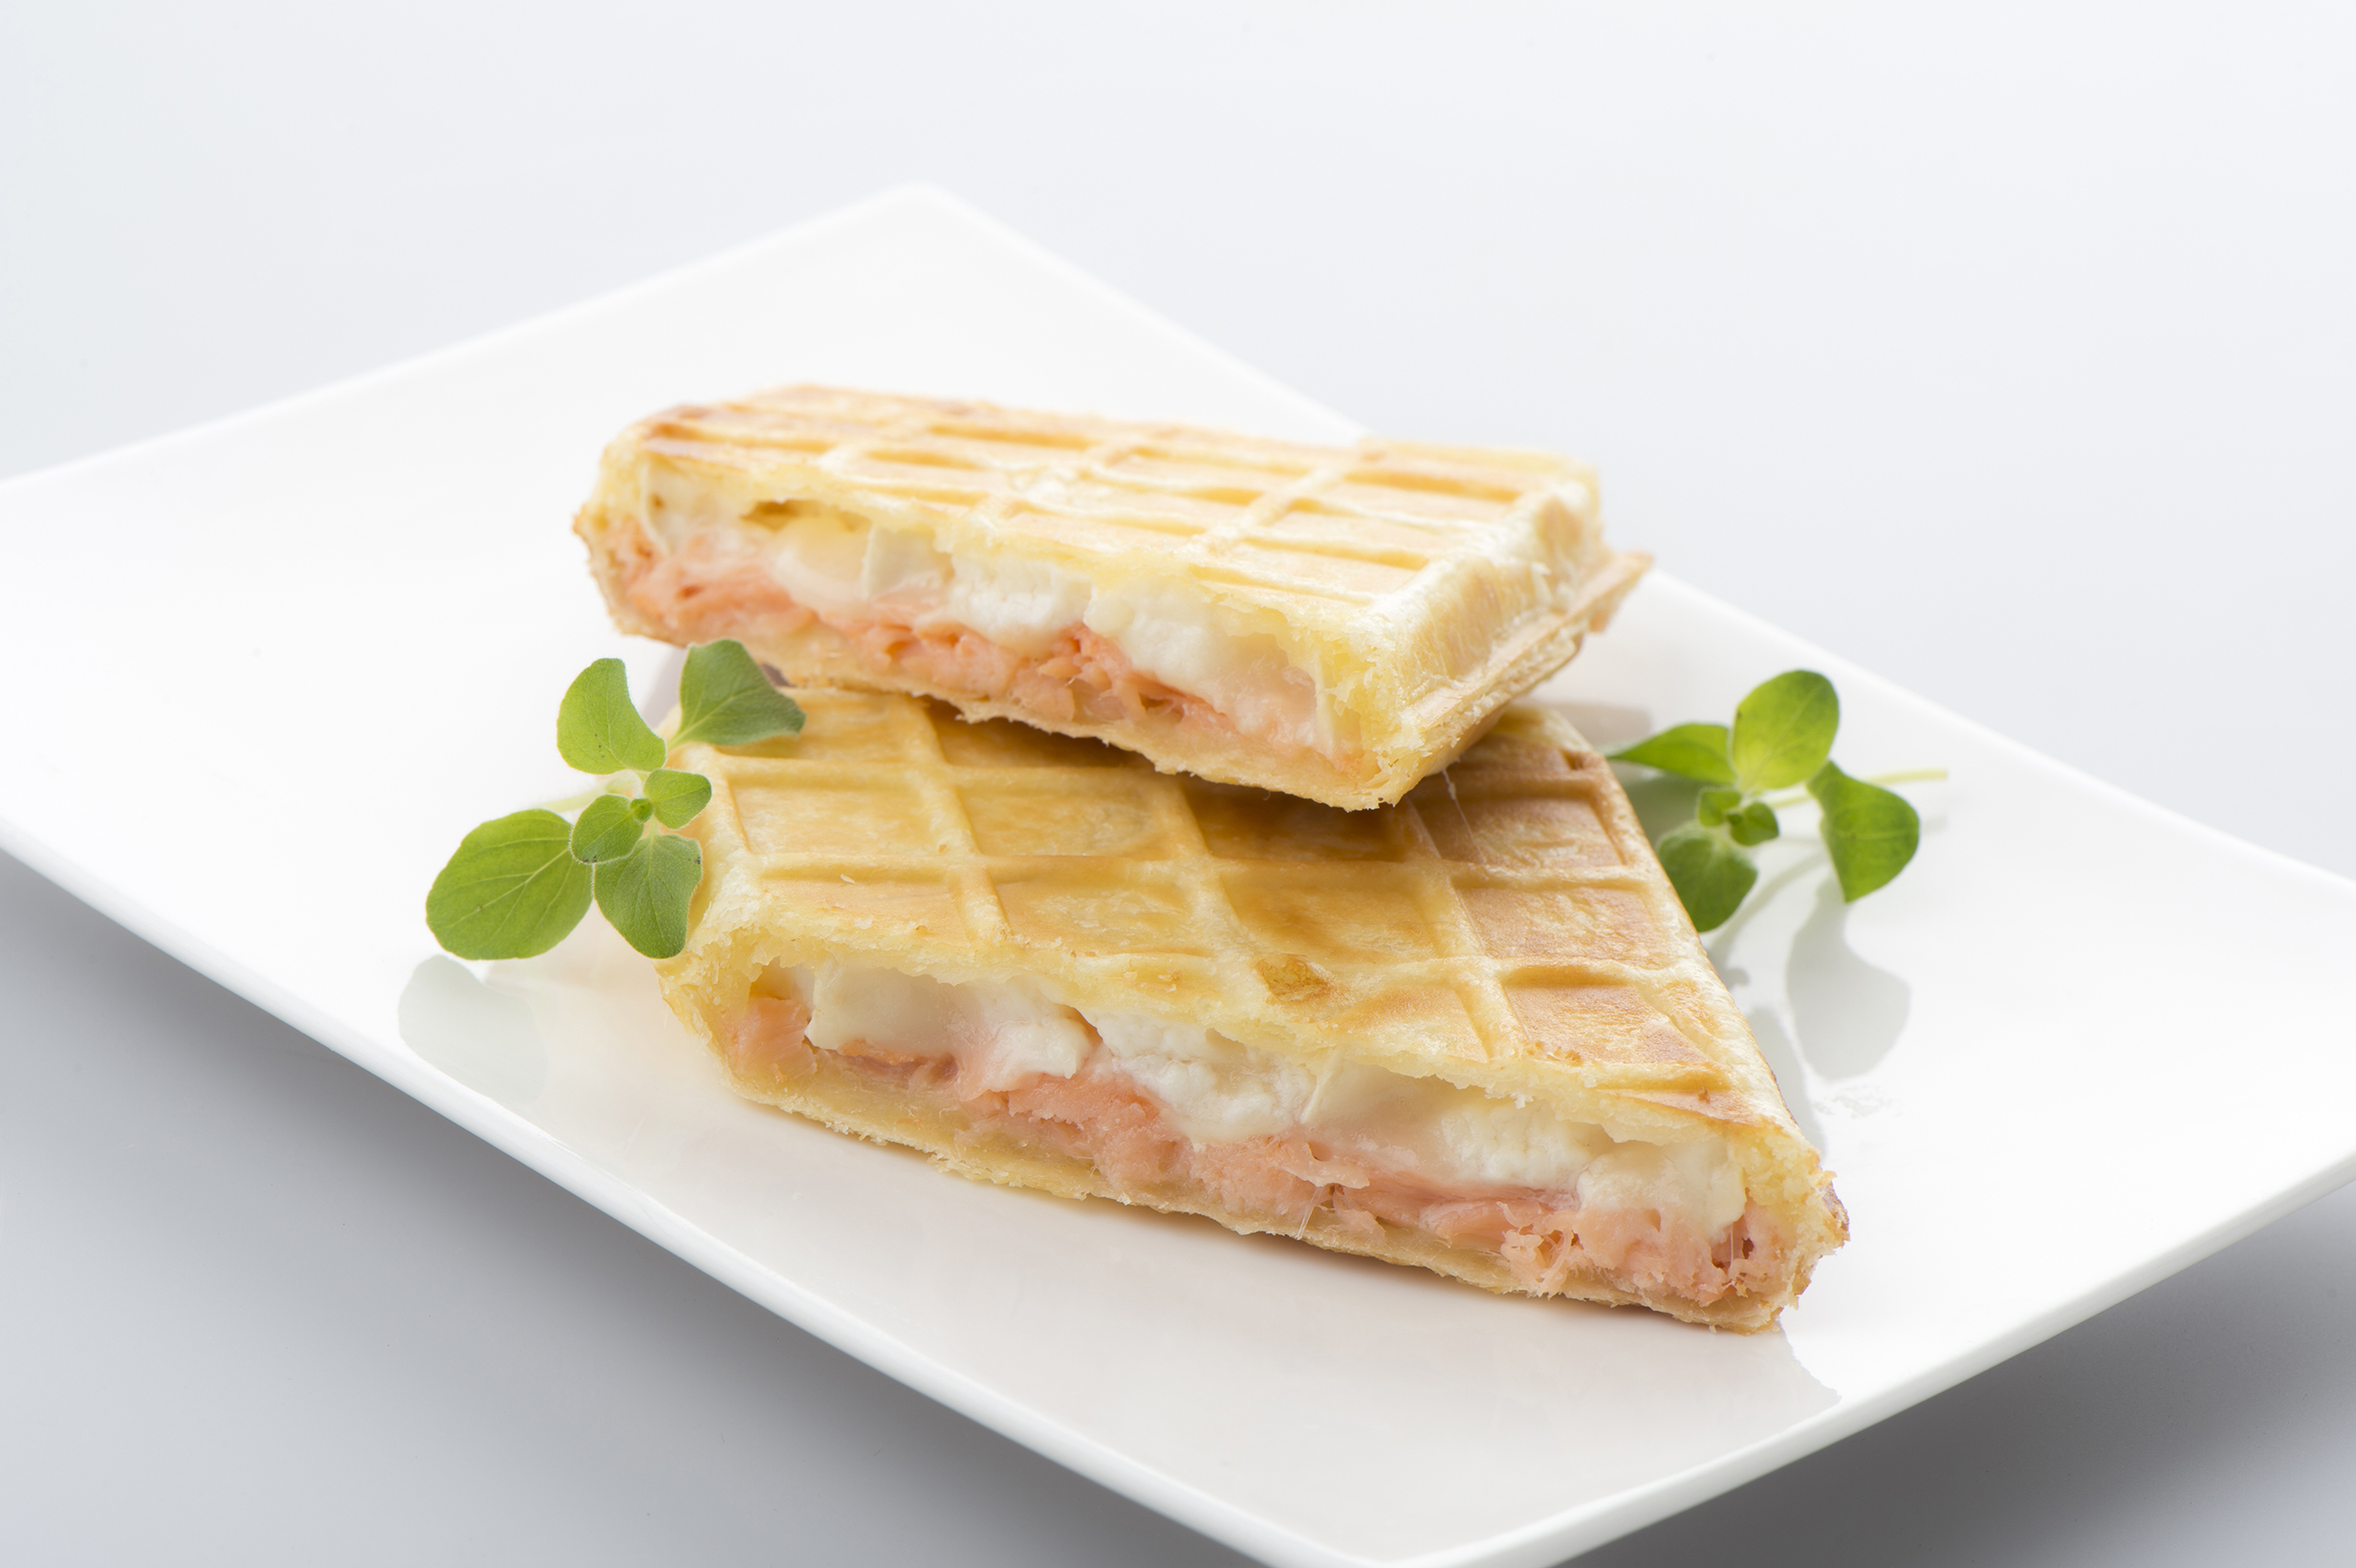 Savory waffle, filled with herb cheese and smoked salmon